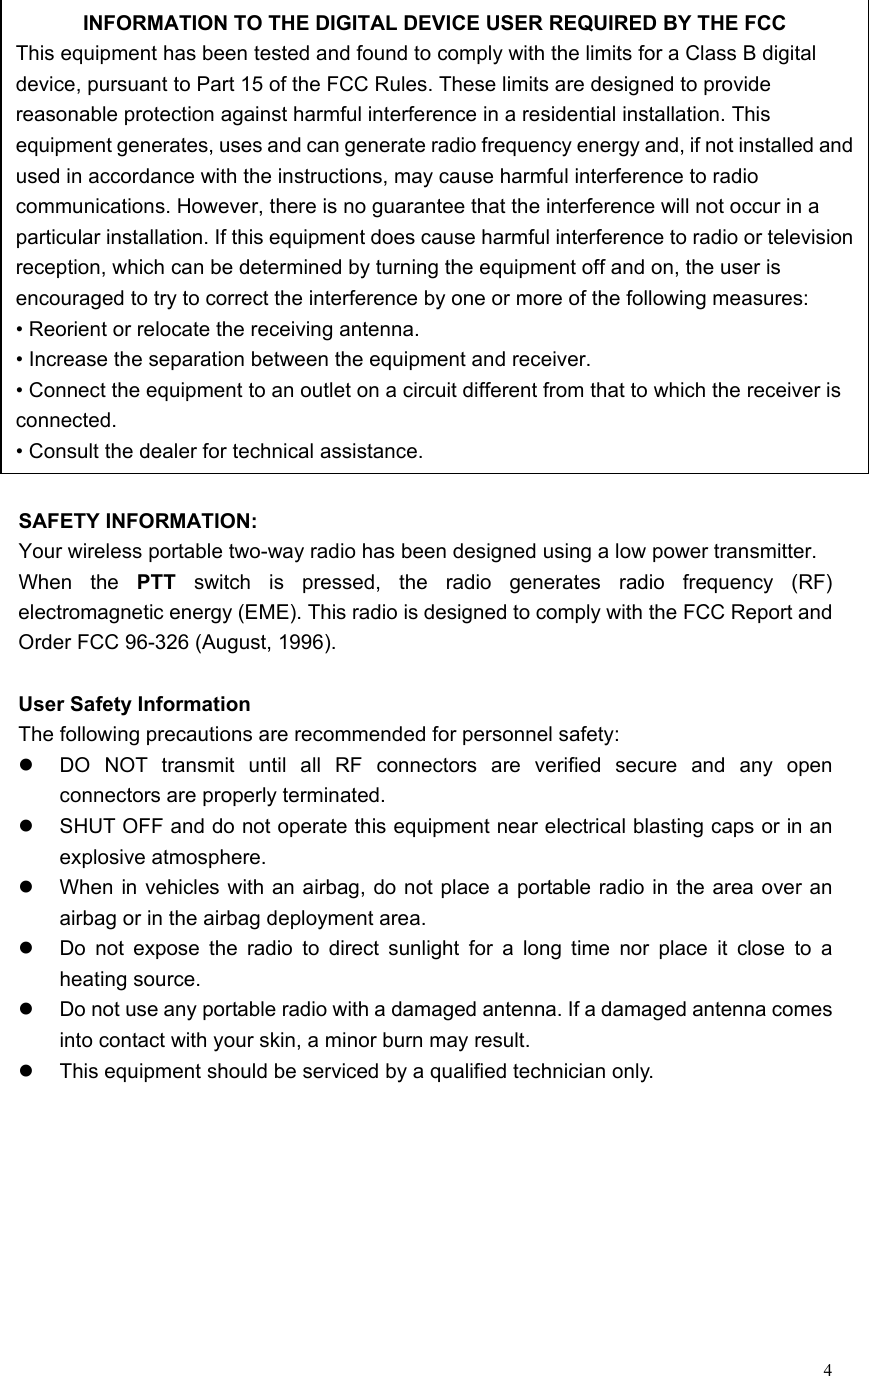   4 SAFETY INFORMATION: Your wireless portable two-way radio has been designed using a low power transmitter. When the PTT switch is pressed, the radio generates radio frequency (RF) electromagnetic energy (EME). This radio is designed to comply with the FCC Report and Order FCC 96-326 (August, 1996).  User Safety Information The following precautions are recommended for personnel safety:   DO NOT transmit until all RF connectors are verified secure and any open connectors are properly terminated.   SHUT OFF and do not operate this equipment near electrical blasting caps or in an explosive atmosphere.   When in vehicles with an airbag, do not place a portable radio in the area over an airbag or in the airbag deployment area.   Do not expose the radio to direct sunlight for a long time nor place it close to a heating source.   Do not use any portable radio with a damaged antenna. If a damaged antenna comes into contact with your skin, a minor burn may result.   This equipment should be serviced by a qualified technician only.     INFORMATION TO THE DIGITAL DEVICE USER REQUIRED BY THE FCC This equipment has been tested and found to comply with the limits for a Class B digital device, pursuant to Part 15 of the FCC Rules. These limits are designed to provide reasonable protection against harmful interference in a residential installation. This equipment generates, uses and can generate radio frequency energy and, if not installed andused in accordance with the instructions, may cause harmful interference to radio communications. However, there is no guarantee that the interference will not occur in a particular installation. If this equipment does cause harmful interference to radio or televisionreception, which can be determined by turning the equipment off and on, the user is encouraged to try to correct the interference by one or more of the following measures: • Reorient or relocate the receiving antenna. • Increase the separation between the equipment and receiver. • Connect the equipment to an outlet on a circuit different from that to which the receiver is connected. • Consult the dealer for technical assistance. 